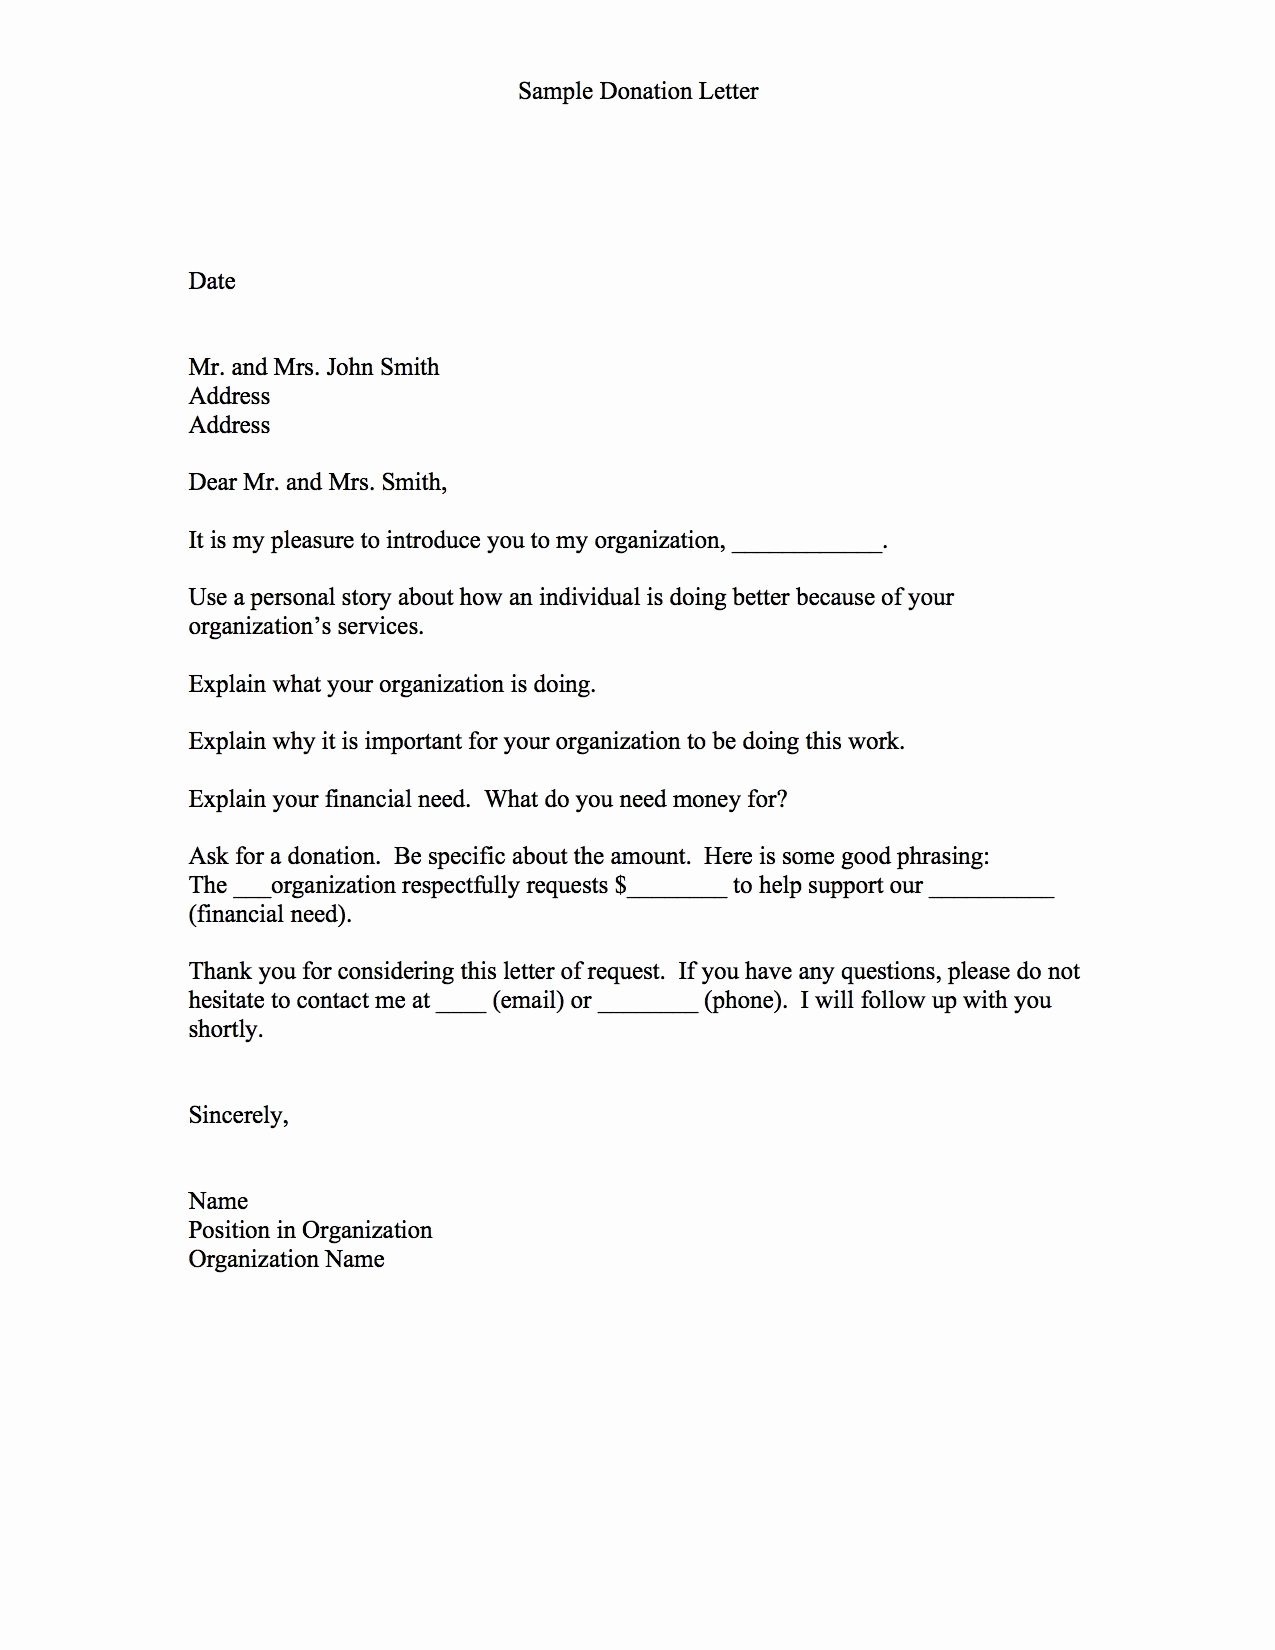 Leed Letter Templates Awesome Parole Letter Template Samples